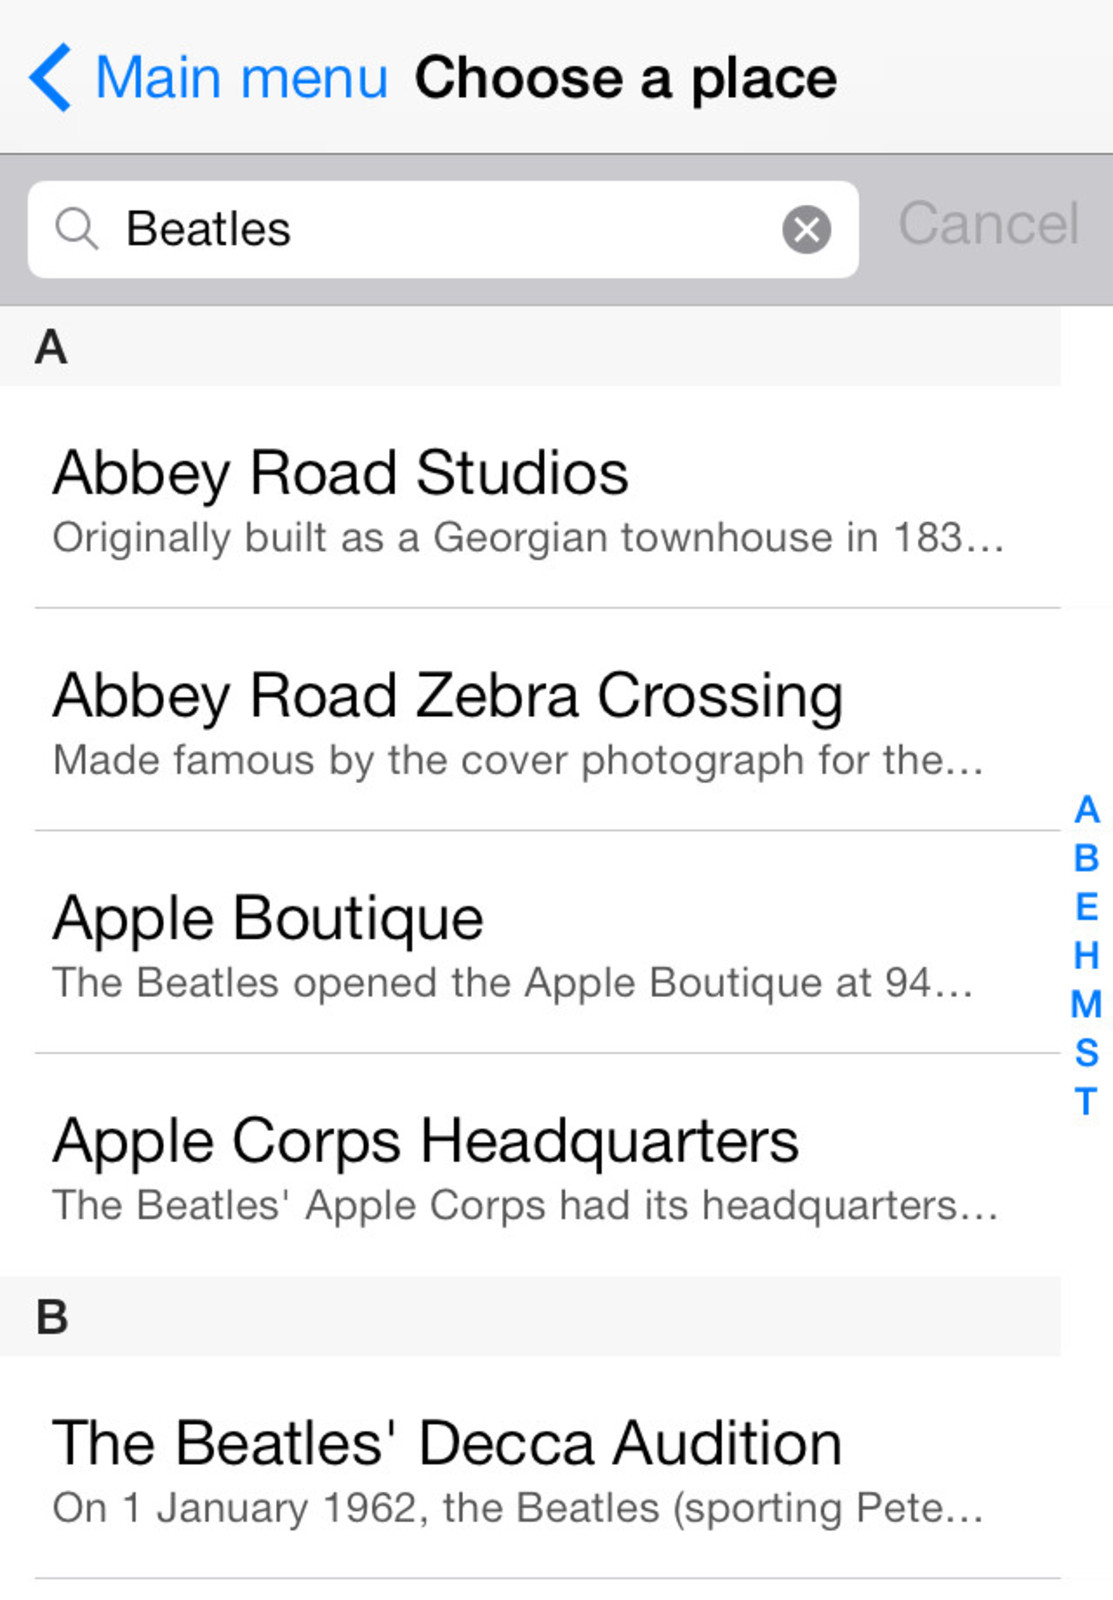 Searching for places of interest in the Tubewalker iPhone application